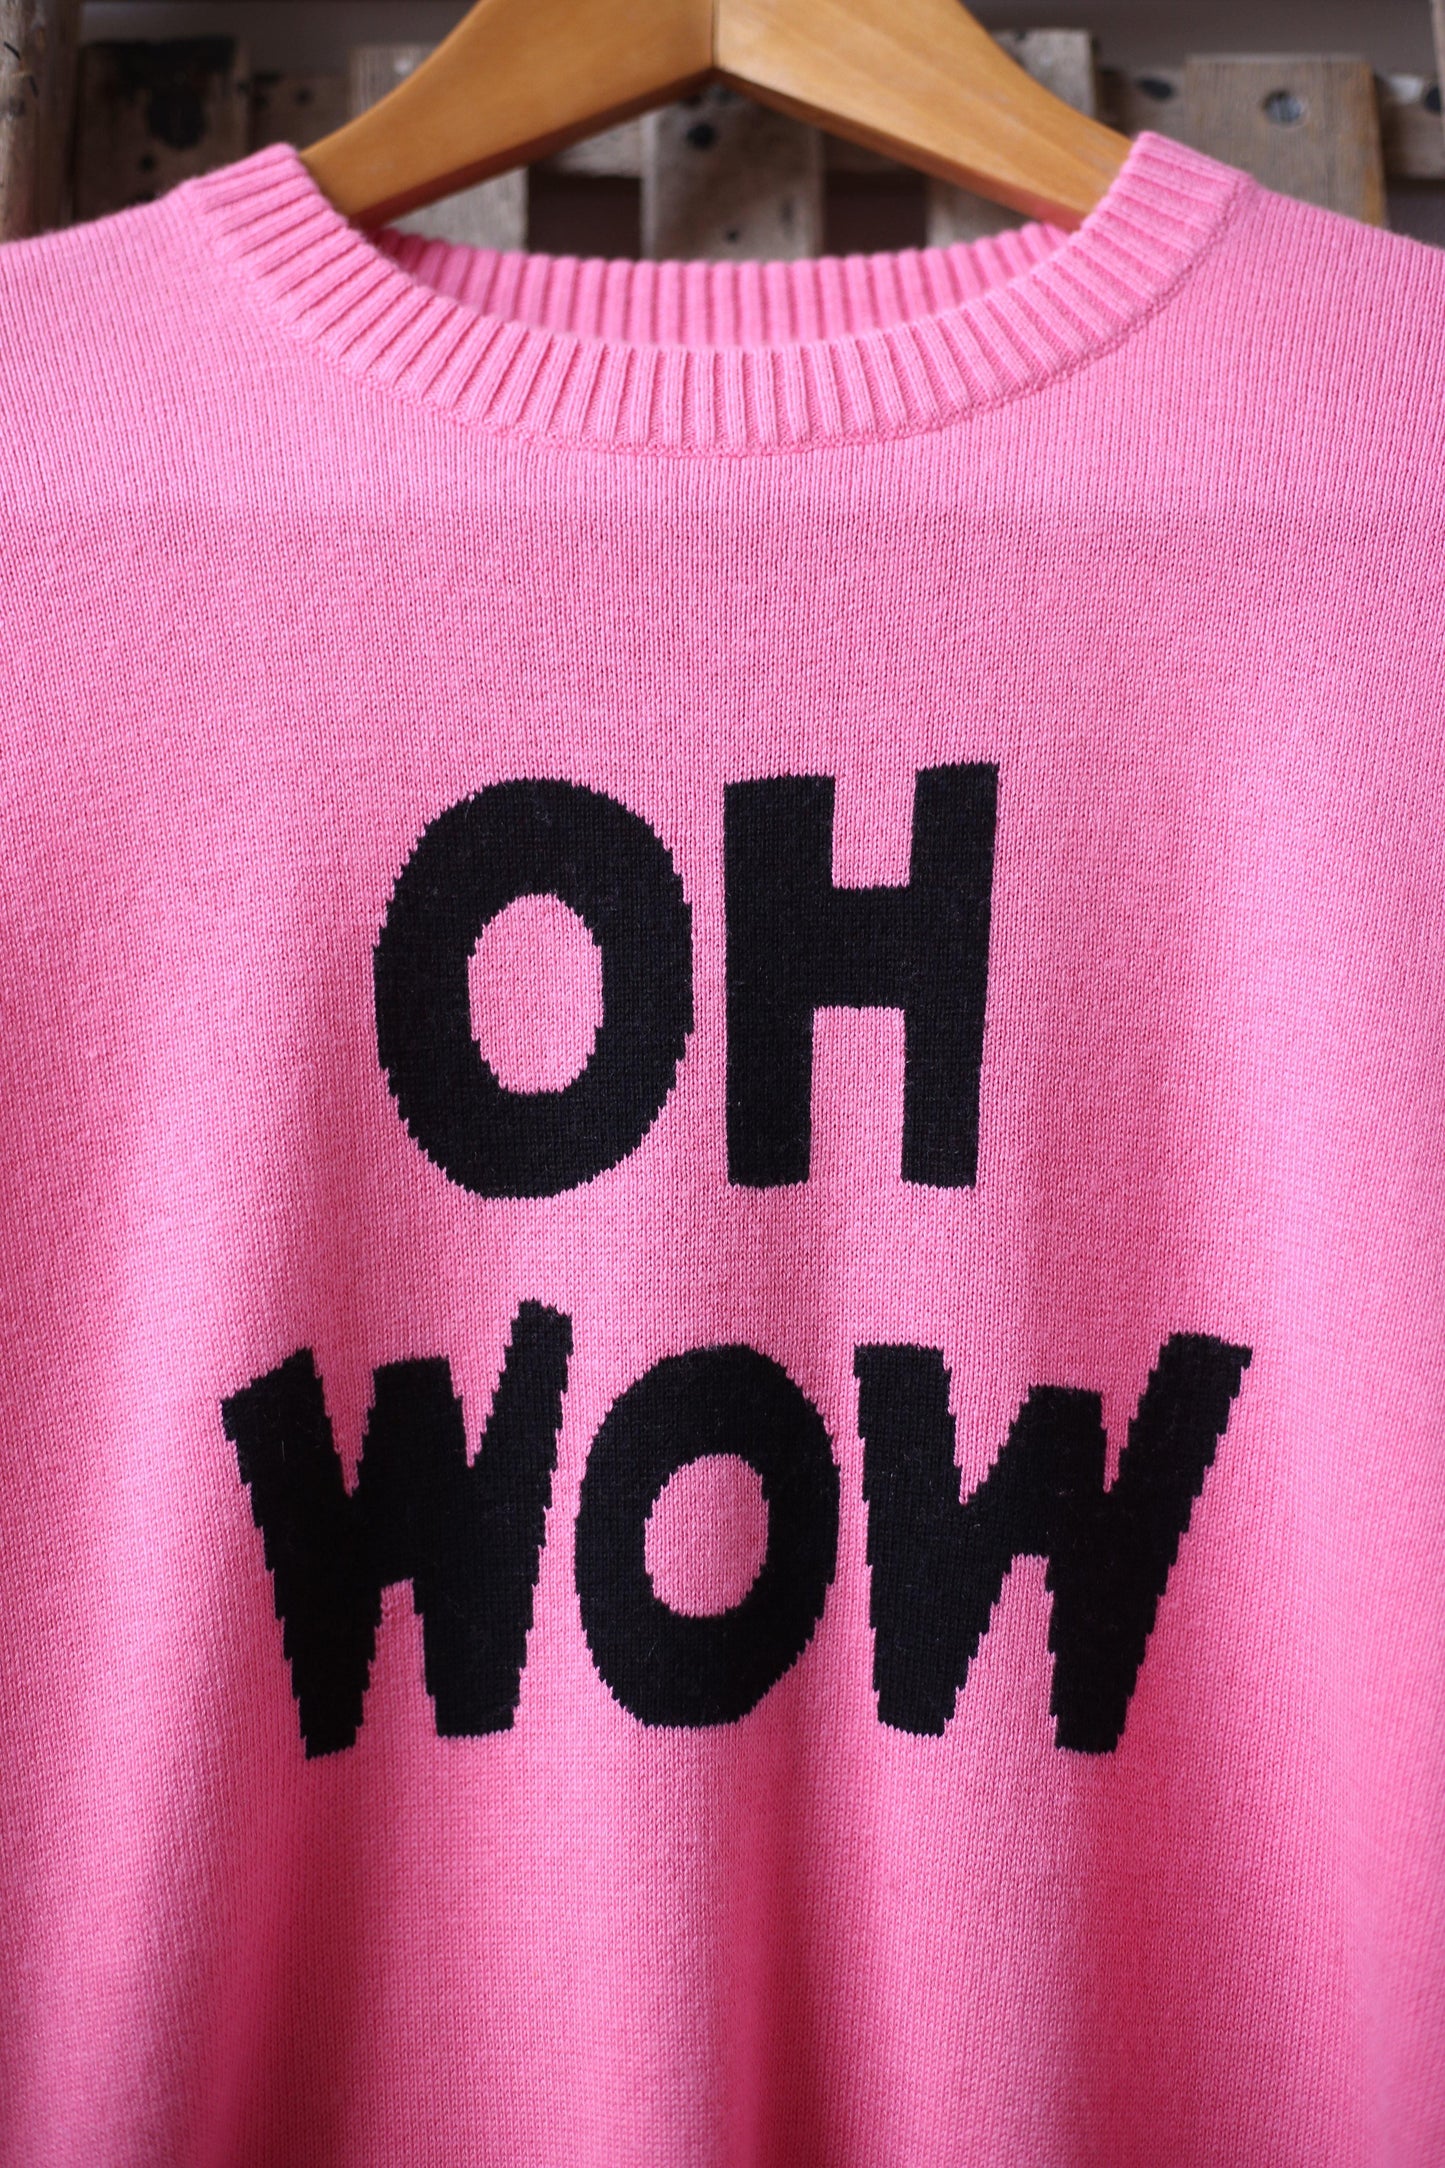 Bella Freud - Oh Wow Pink Jumper - 32 The Guild 